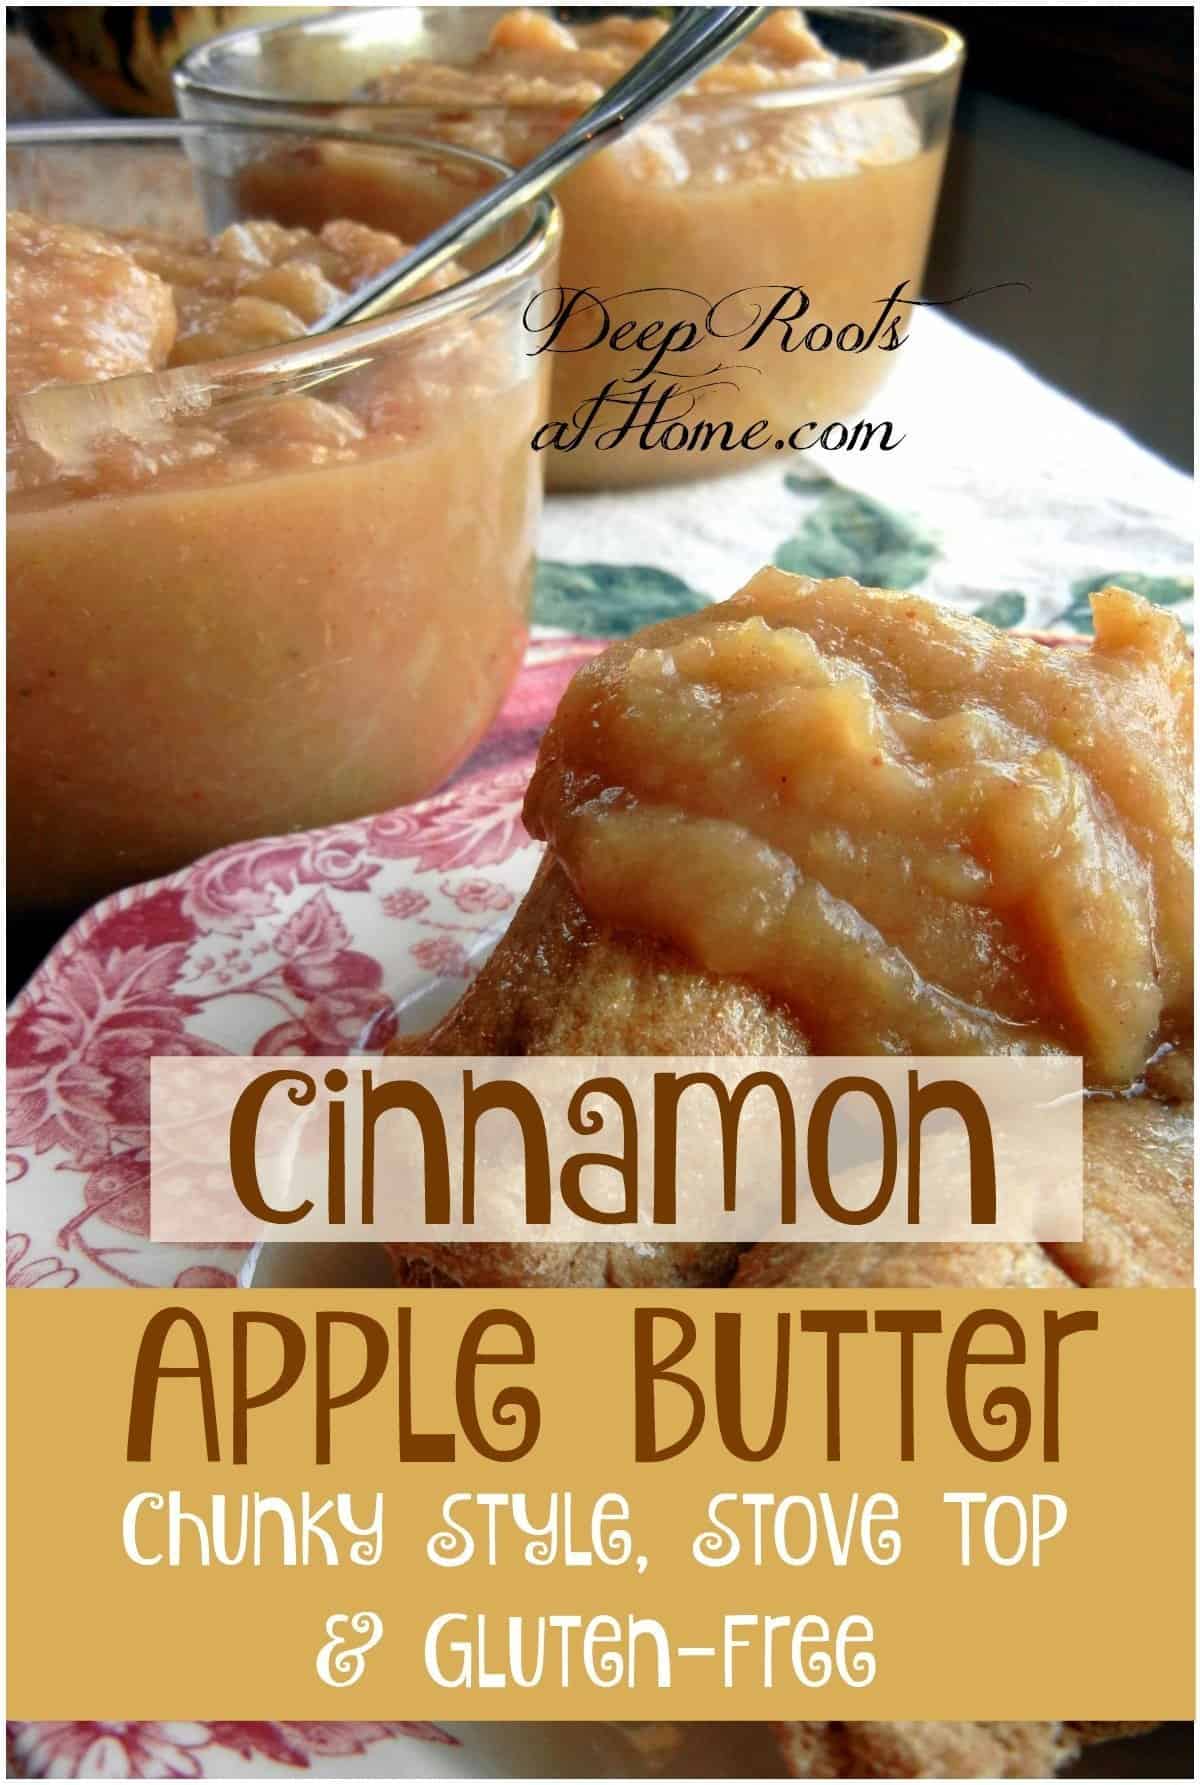 Cinnamon Apple Butter: Old-Fashioned Chunky Style & Gluten-Free. braided loaf with apples